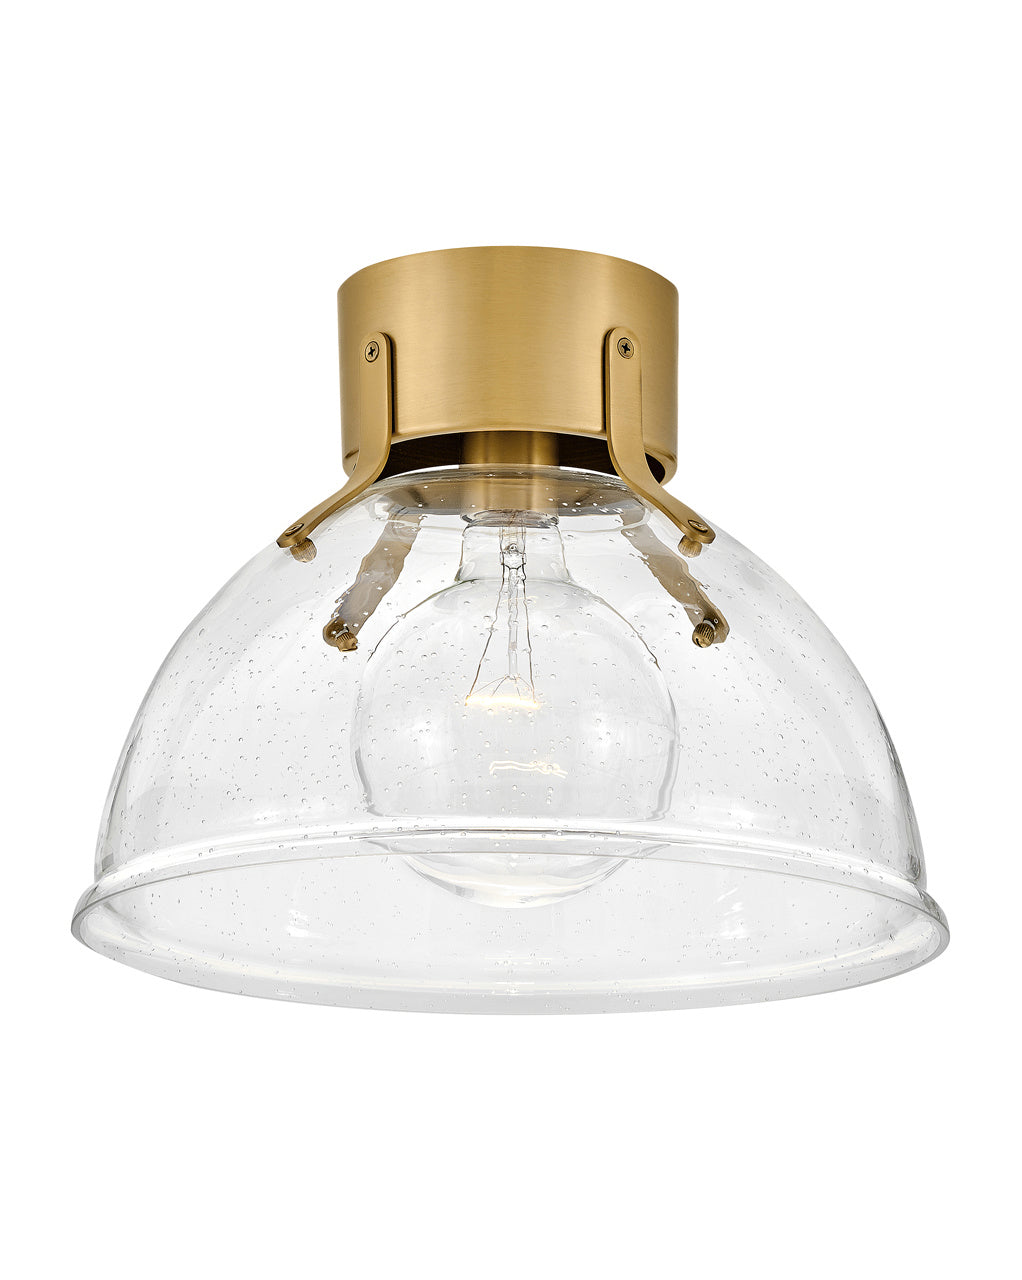 Hinkley Canada - LED Flush Mount - Argo - Heritage Brass with Clear Seedy glass- Union Lighting Luminaires Decor